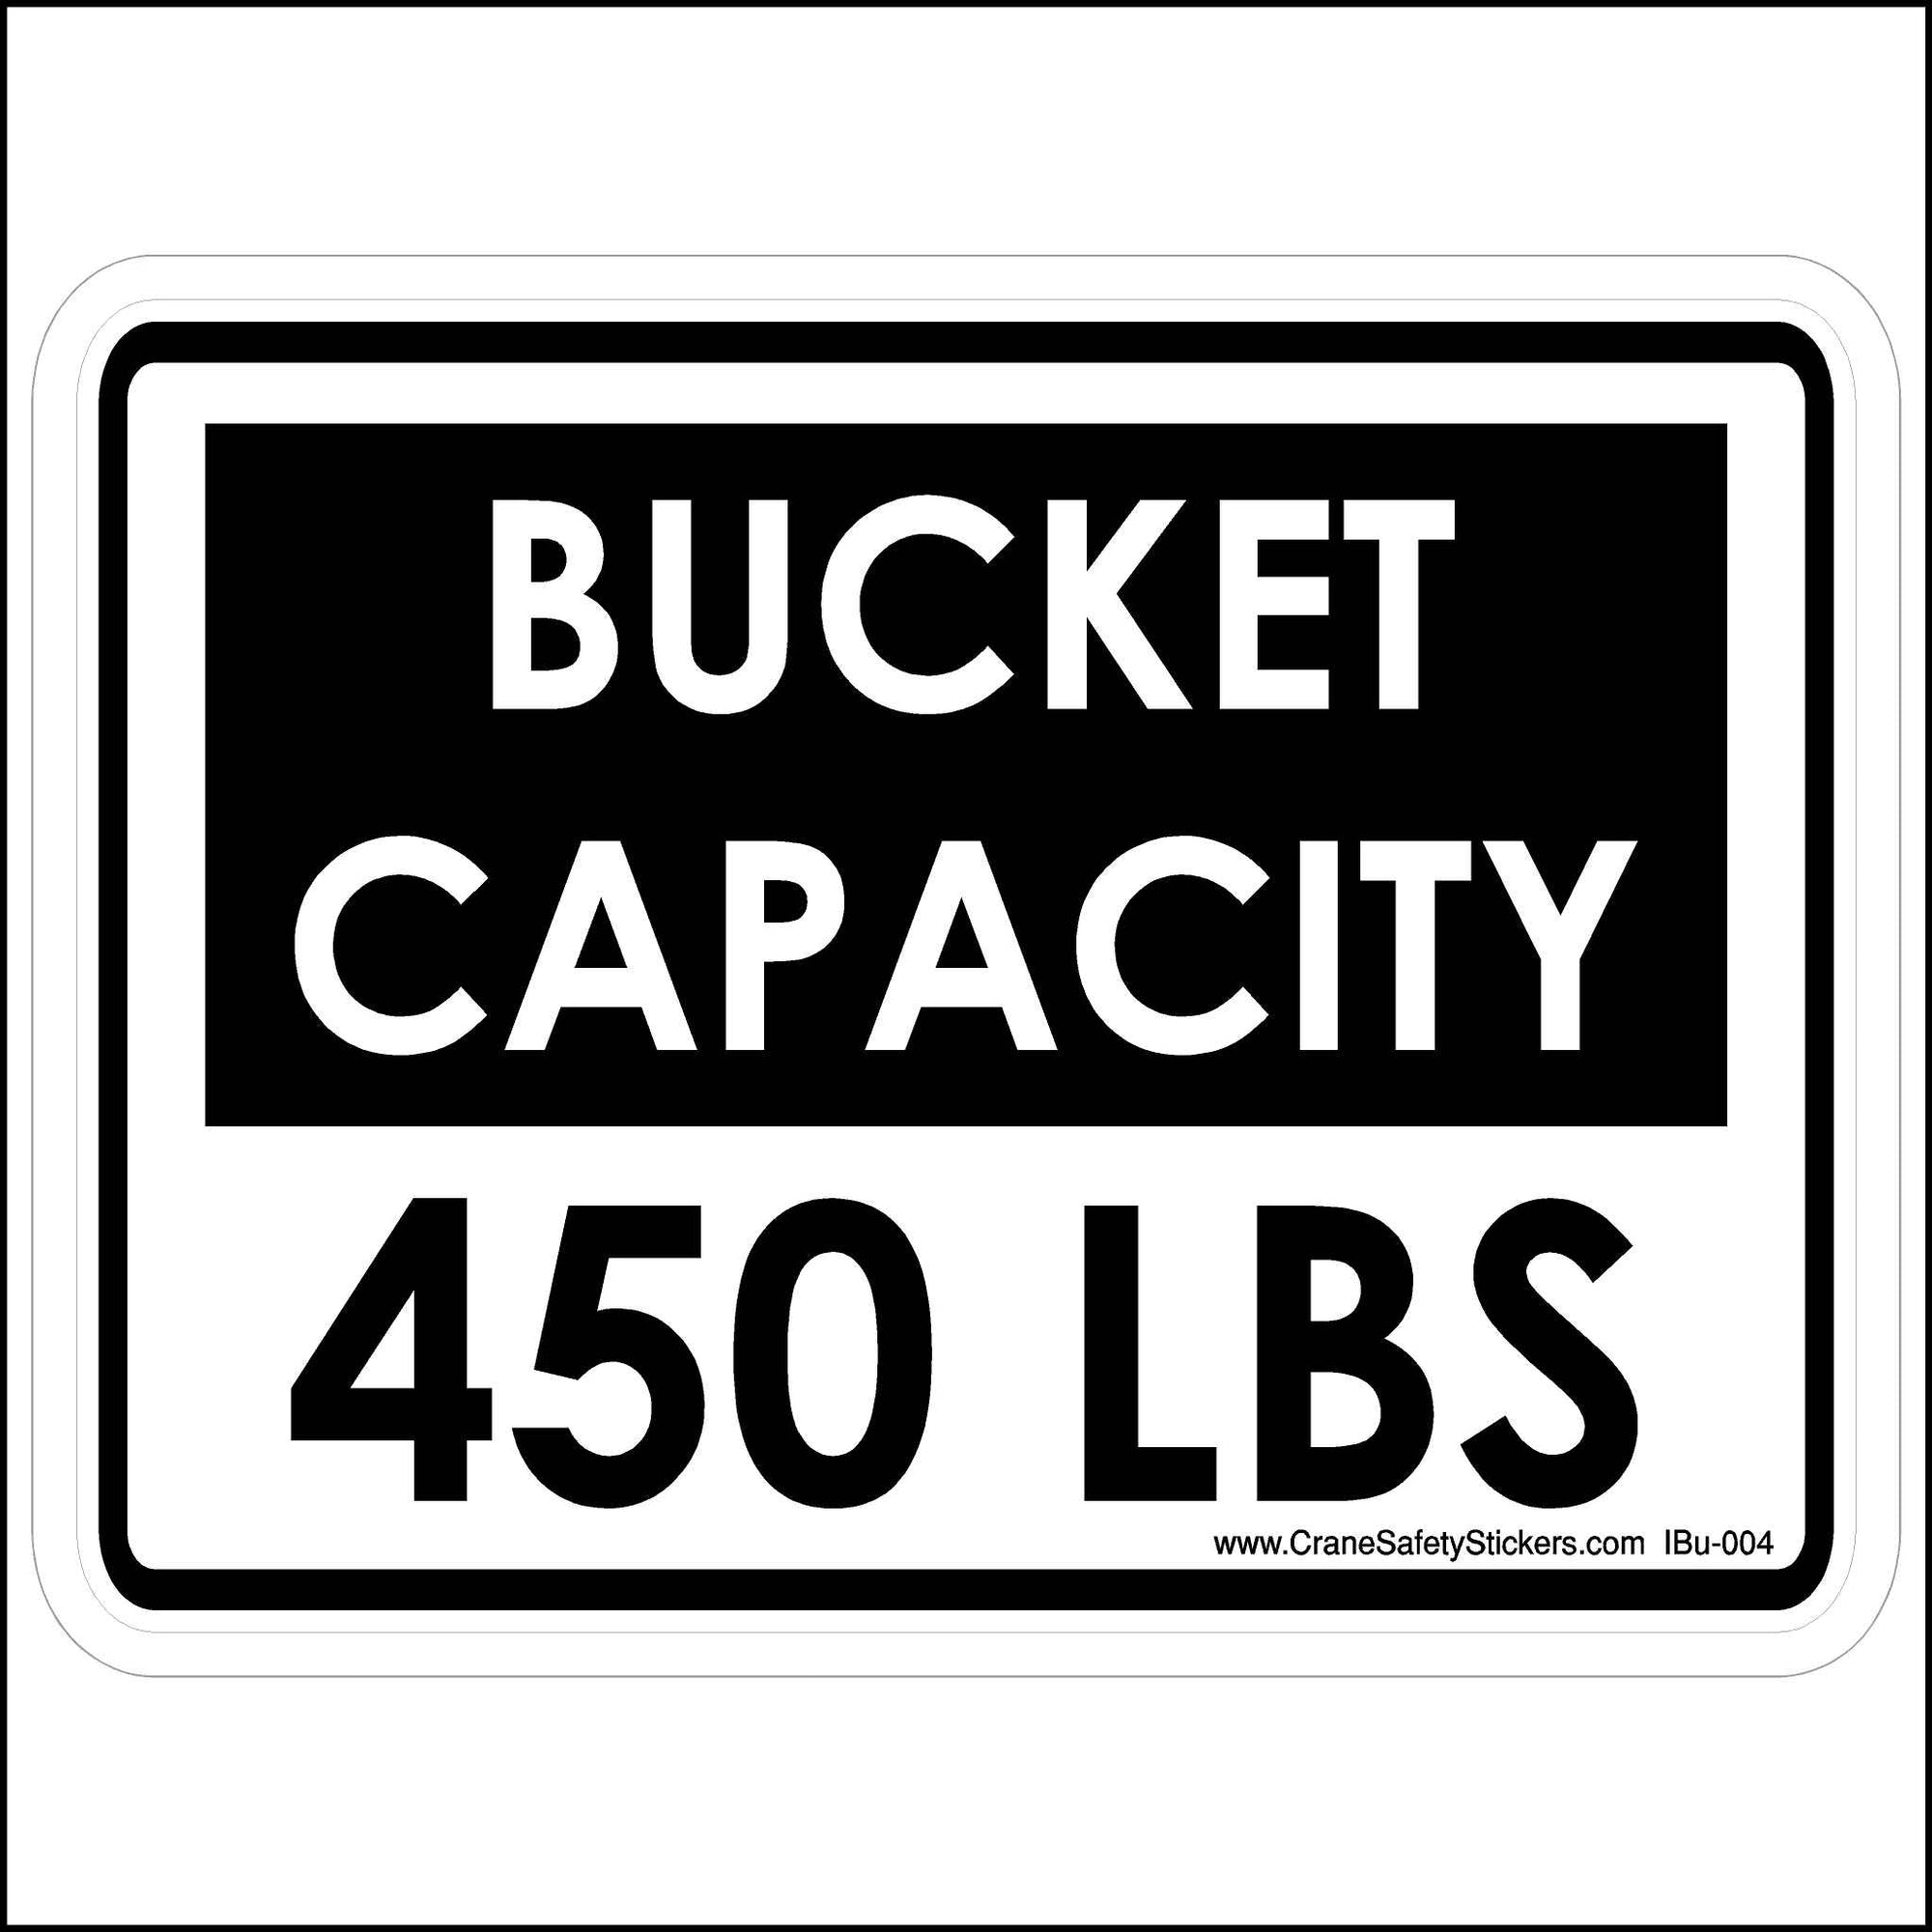 This Bucket Capacity 450 Lbs Sticker For Bucket Trucks Is Printed With. Bucket Capacity 450 LBS.